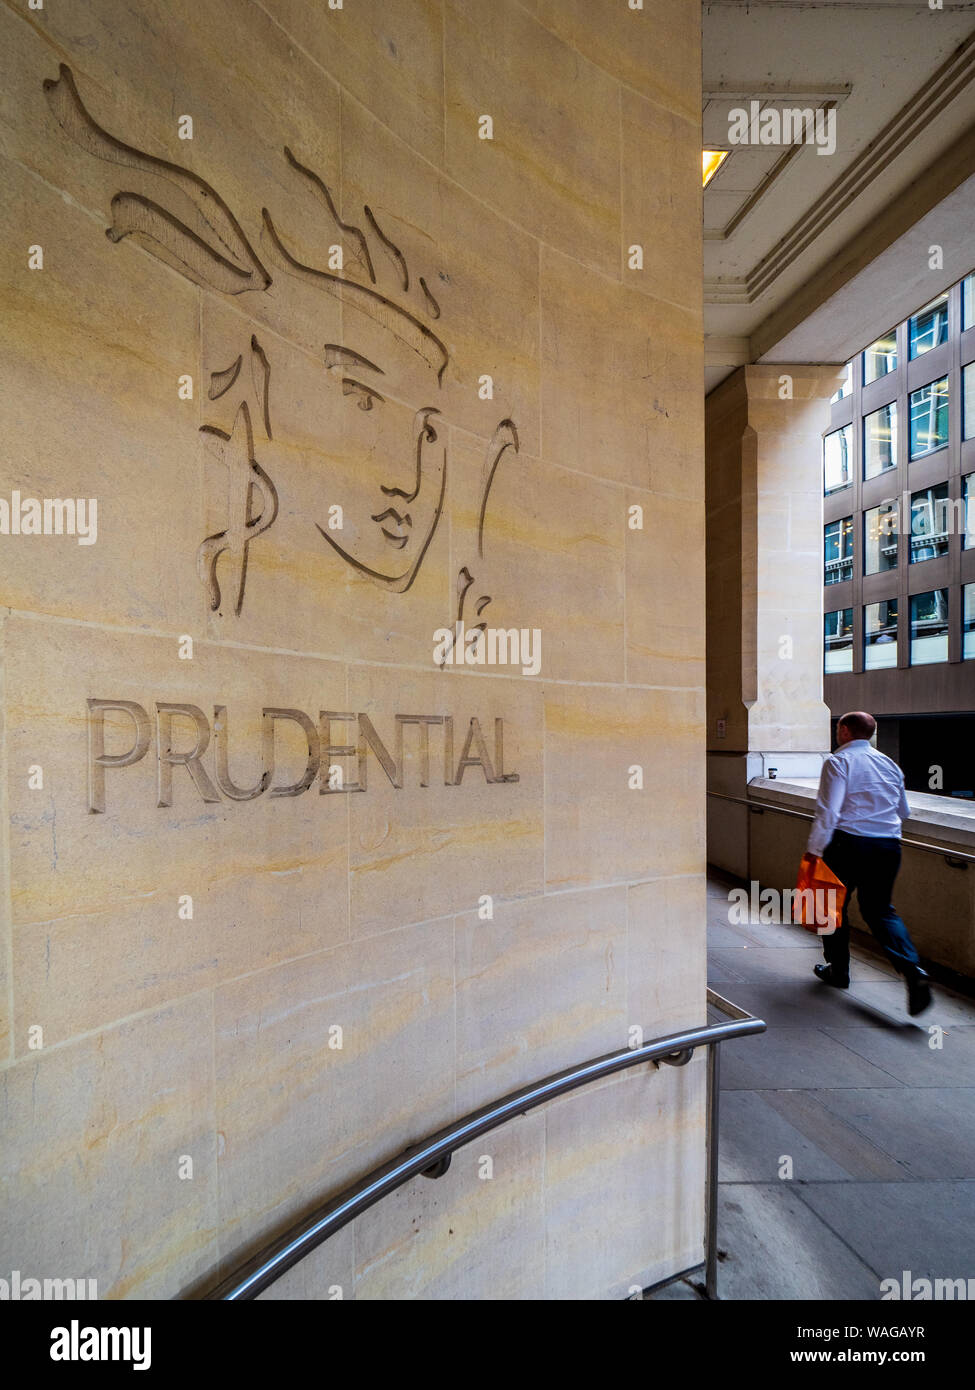 Prudential London Logo - Logo of the Prudential Life Insurance and Financial Services Company carved into the wall of a building in Central London UK Stock Photo